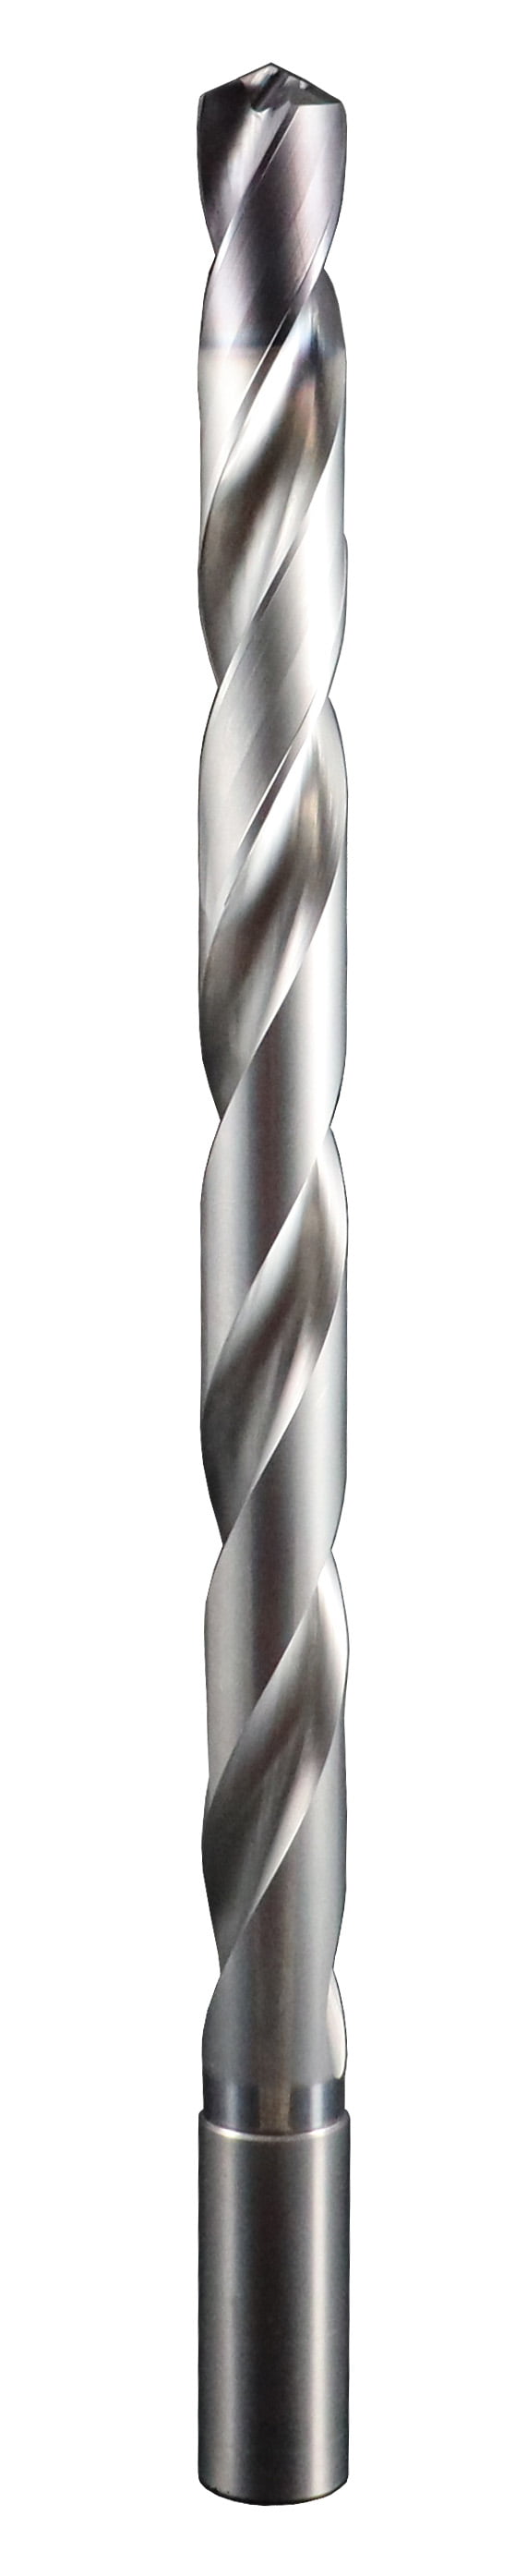 3.40mm Dia, 137 Degree Point, Solid Carbide Drill - 66713